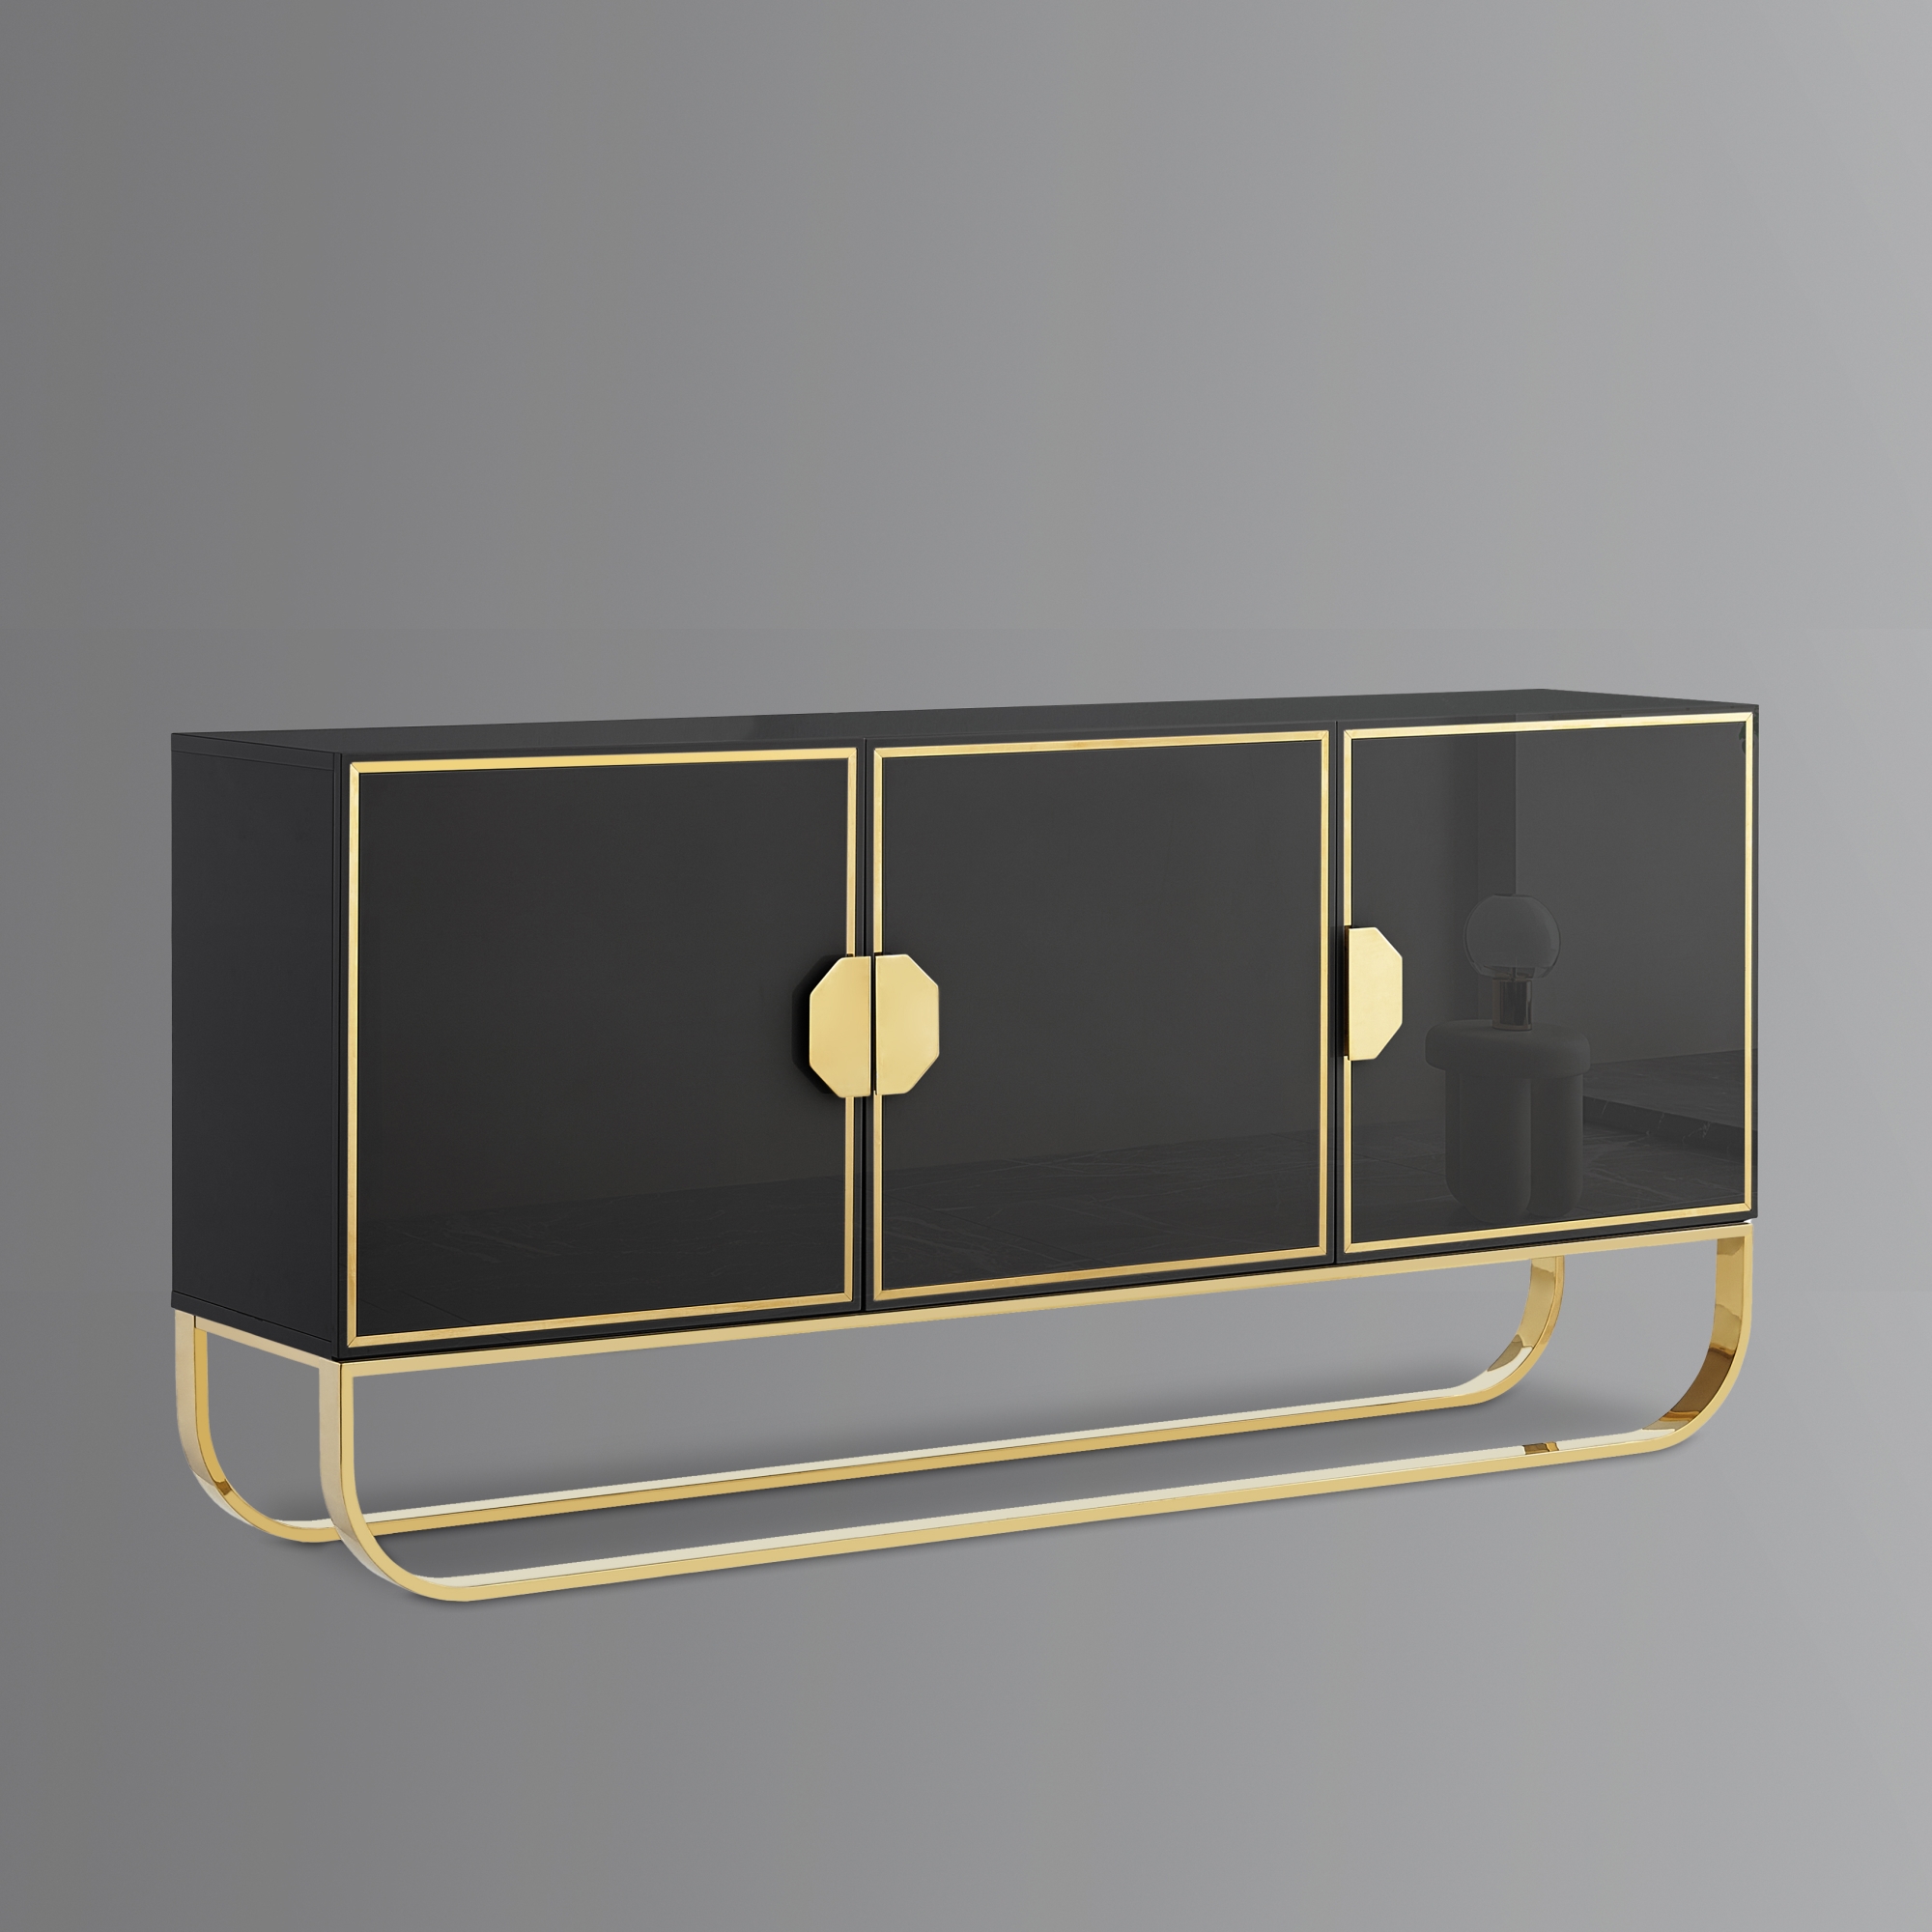 Nicole Miller Lilyanne Sideboard 3-Door High Gloss Finish Gold/Chrome Handles and Rounded Frame